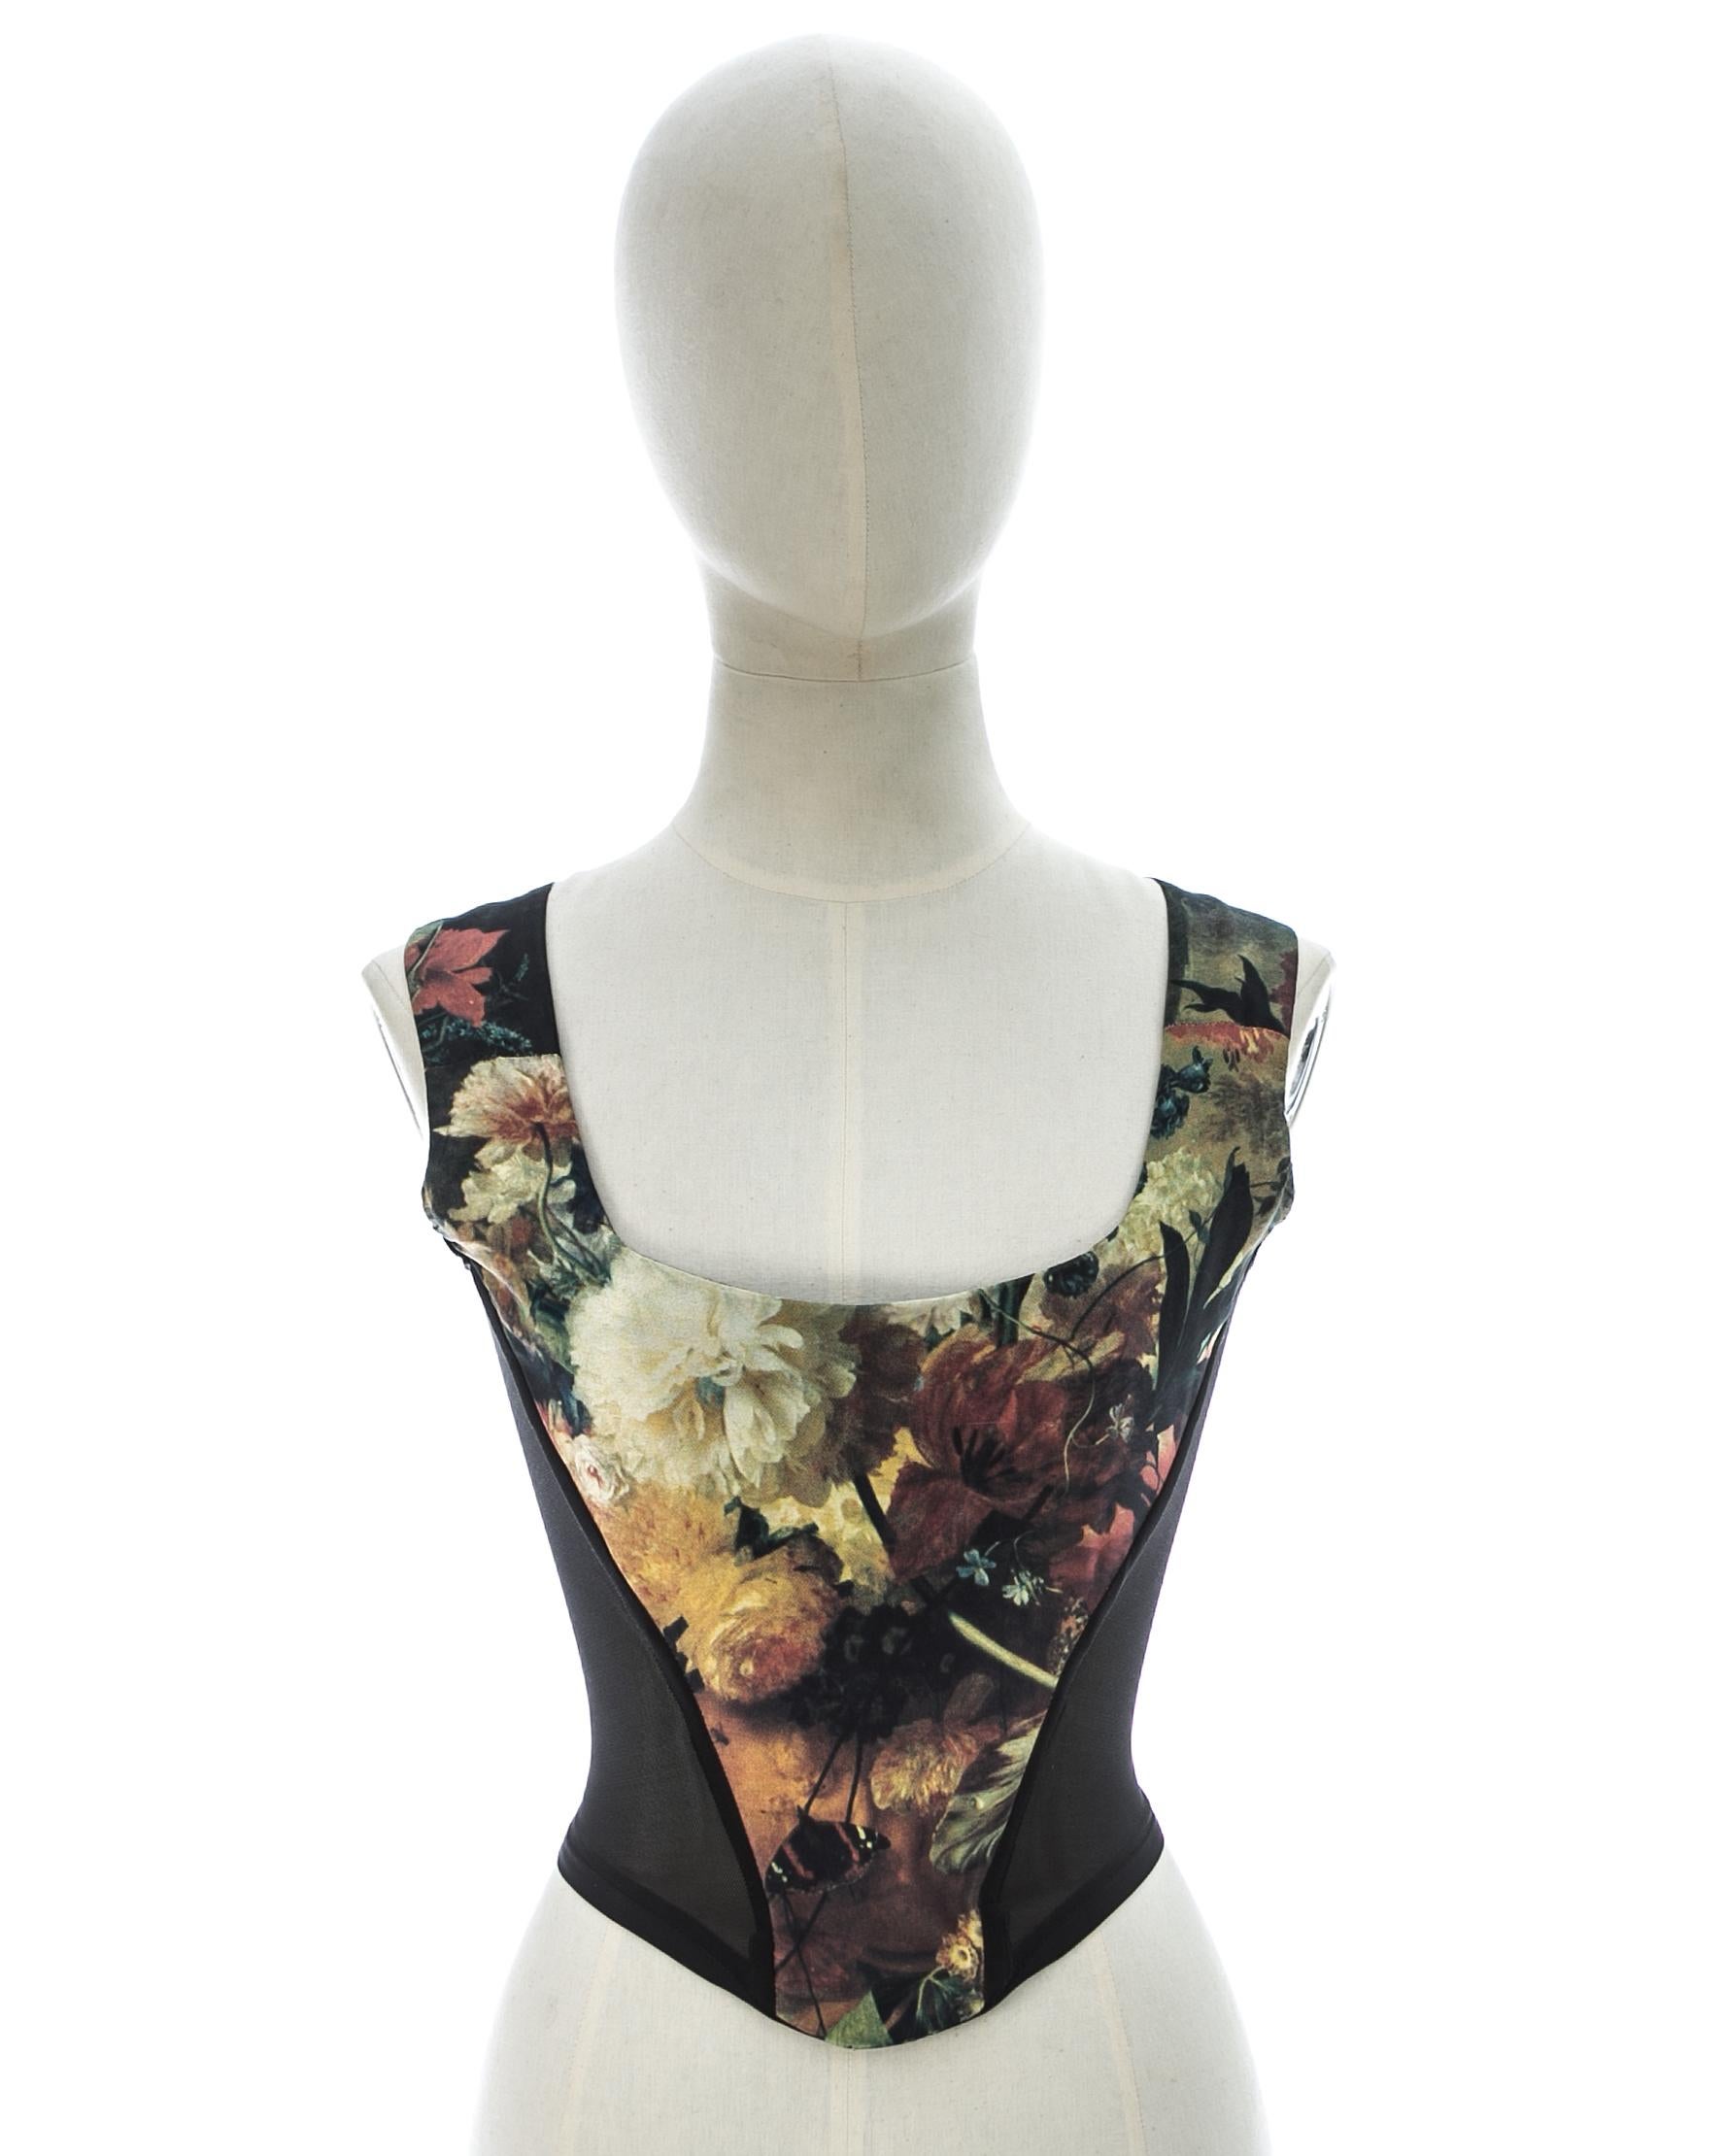 Renaissance floral print corset with black semi-sheer side panels and built-in boning; designed to cinch the waist and push the breasts up.

Fall-Winter 1995